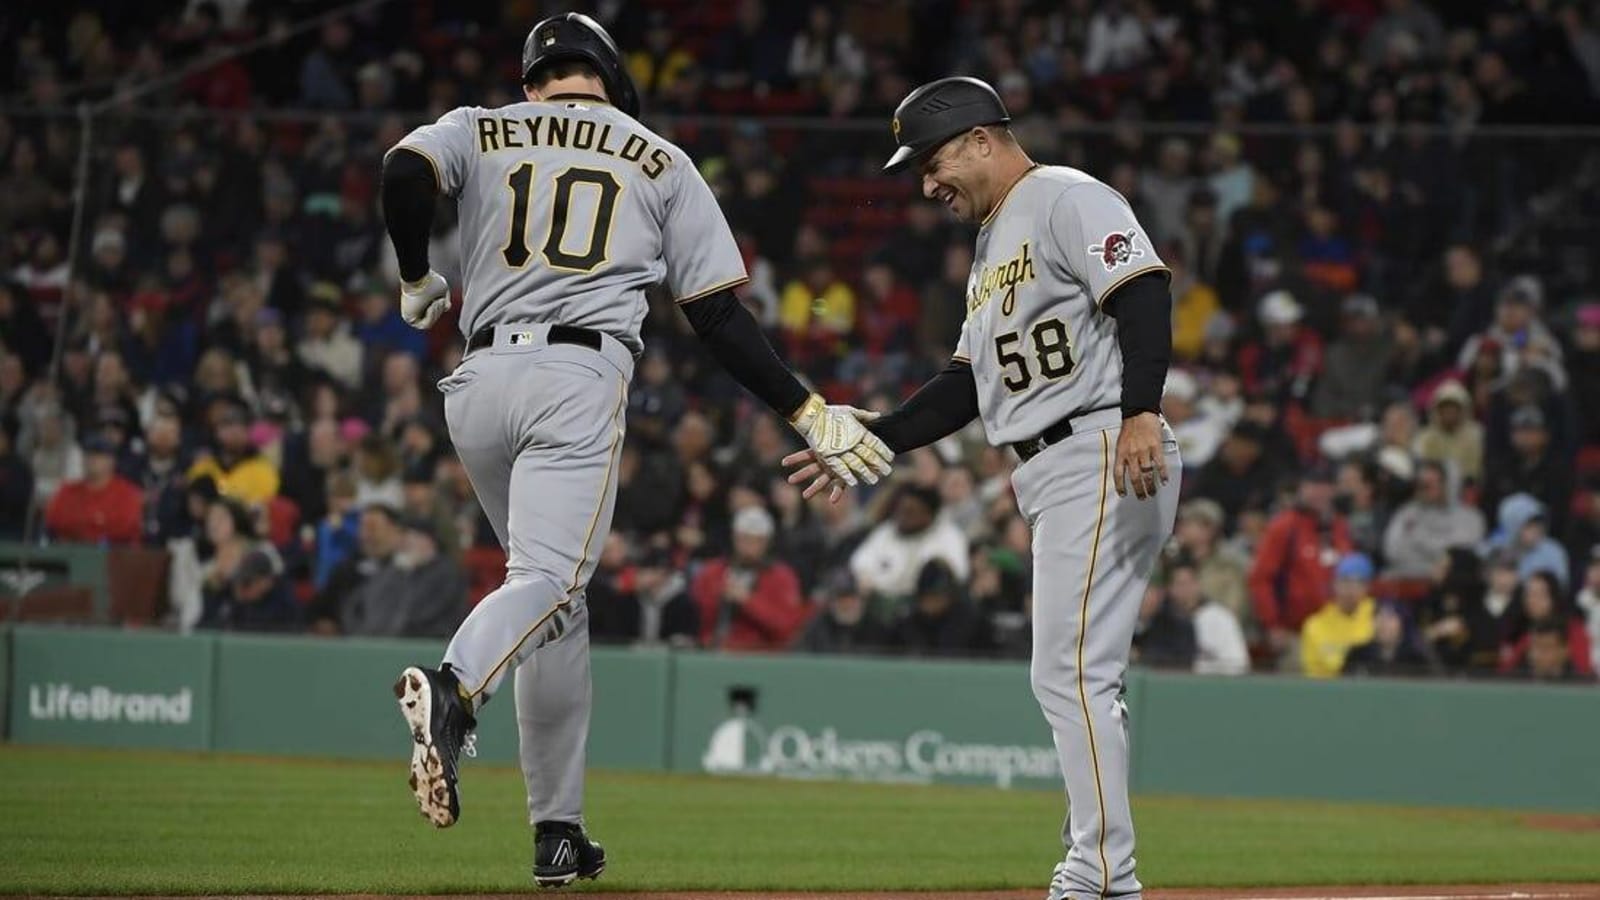 Bryan Reynolds homers again as Pirates down Red Sox